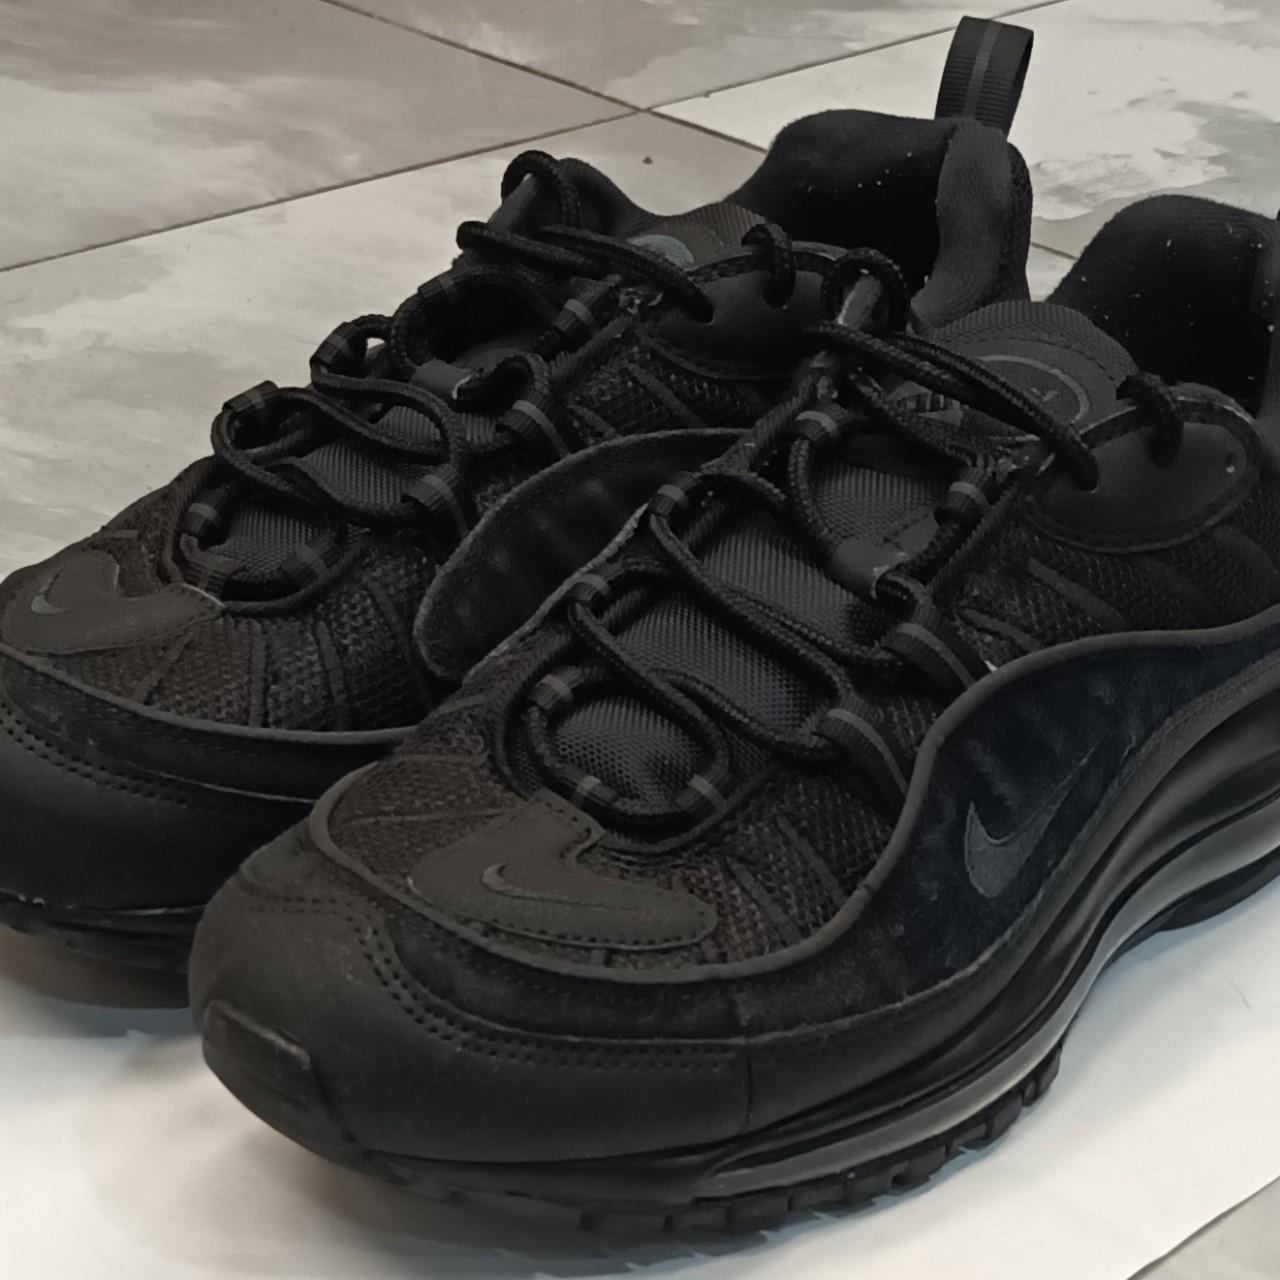 Black nike Air Max trainers. Great for going out to... - Depop